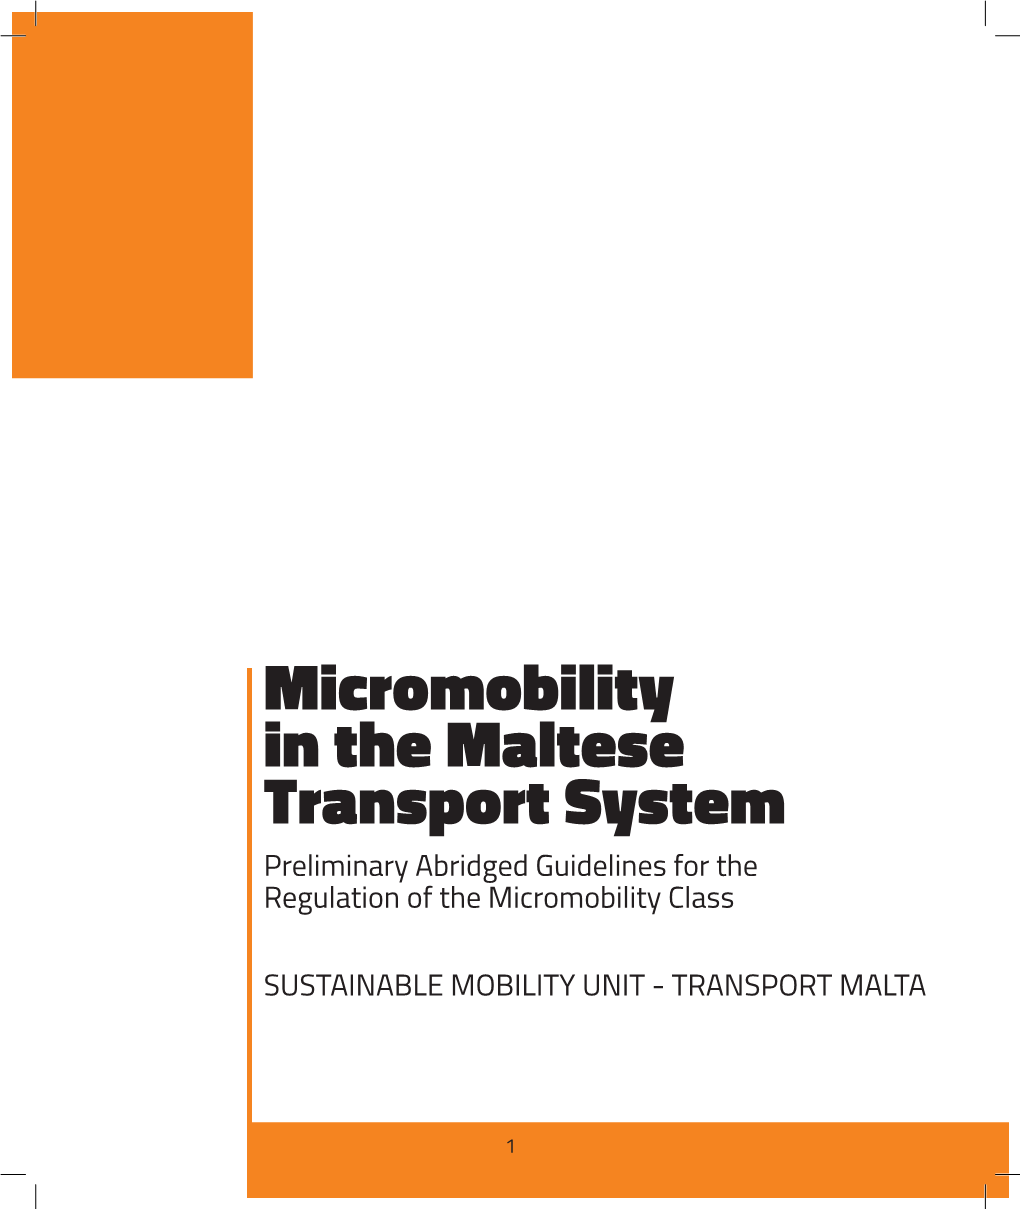 Micromobility in the Maltese Transport System Preliminary Abridged Guidelines for the Regulation of the Micromobility Class